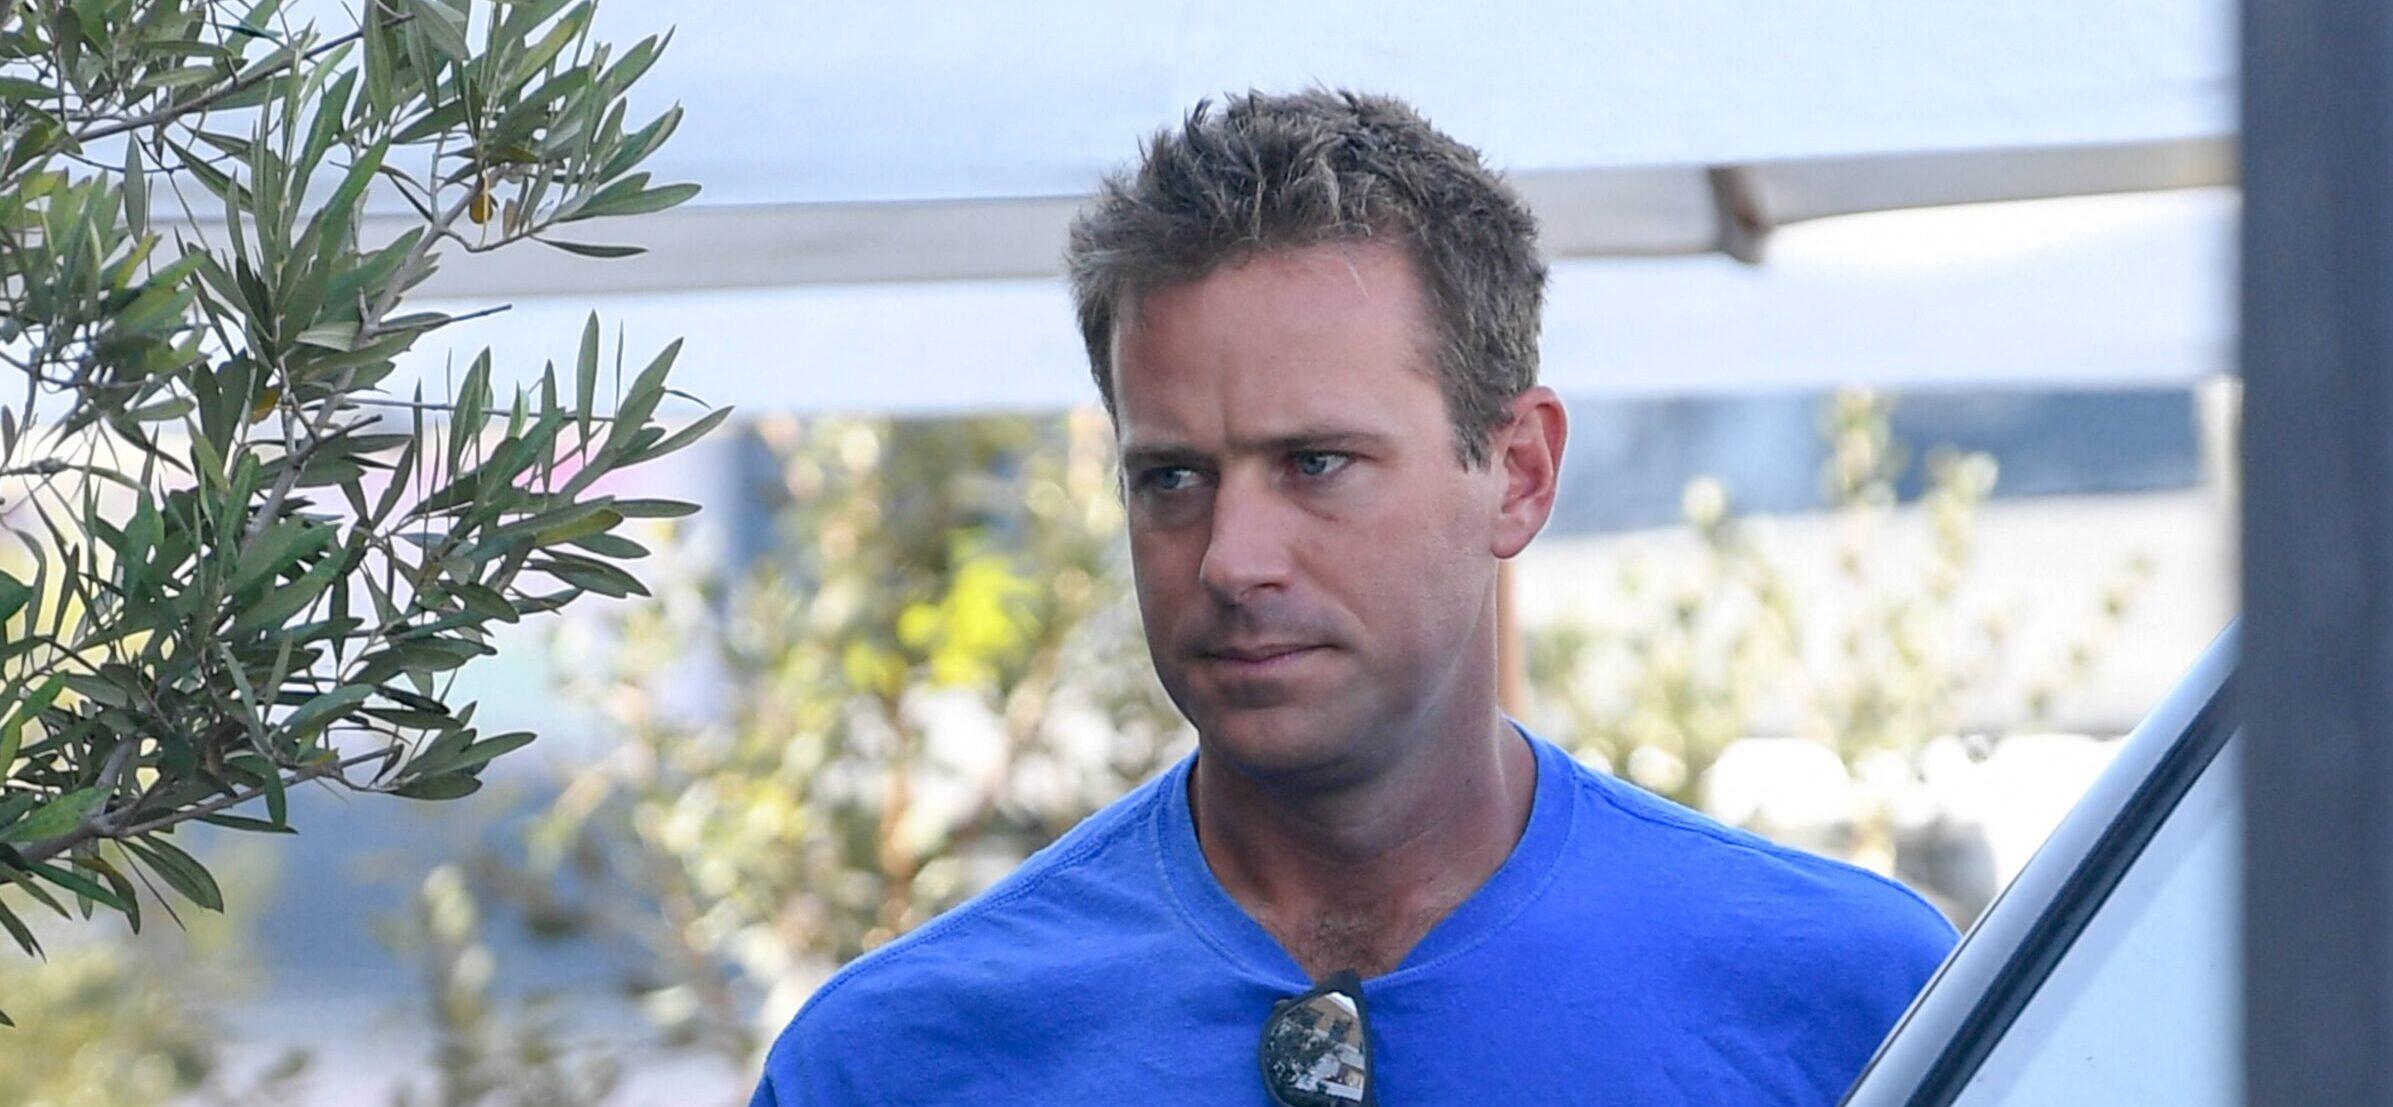 Armie Hammer One Step Closer to Legal Single Status